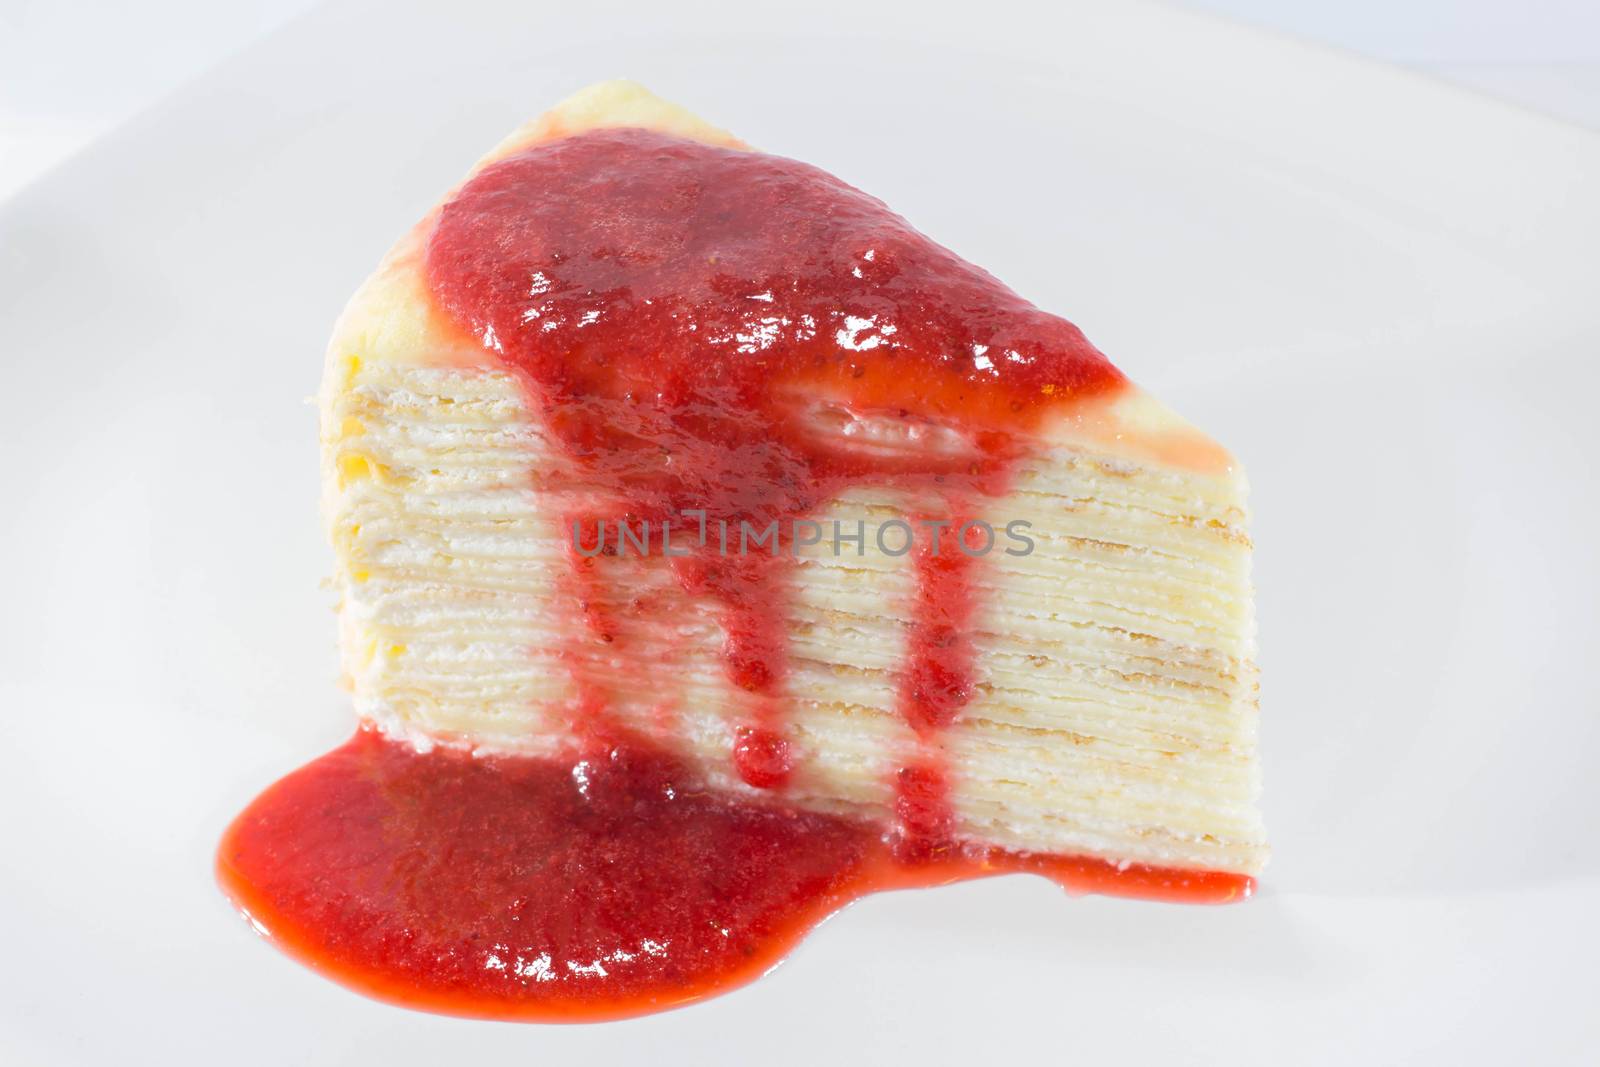 Crepe Cake with strawberry source on dish